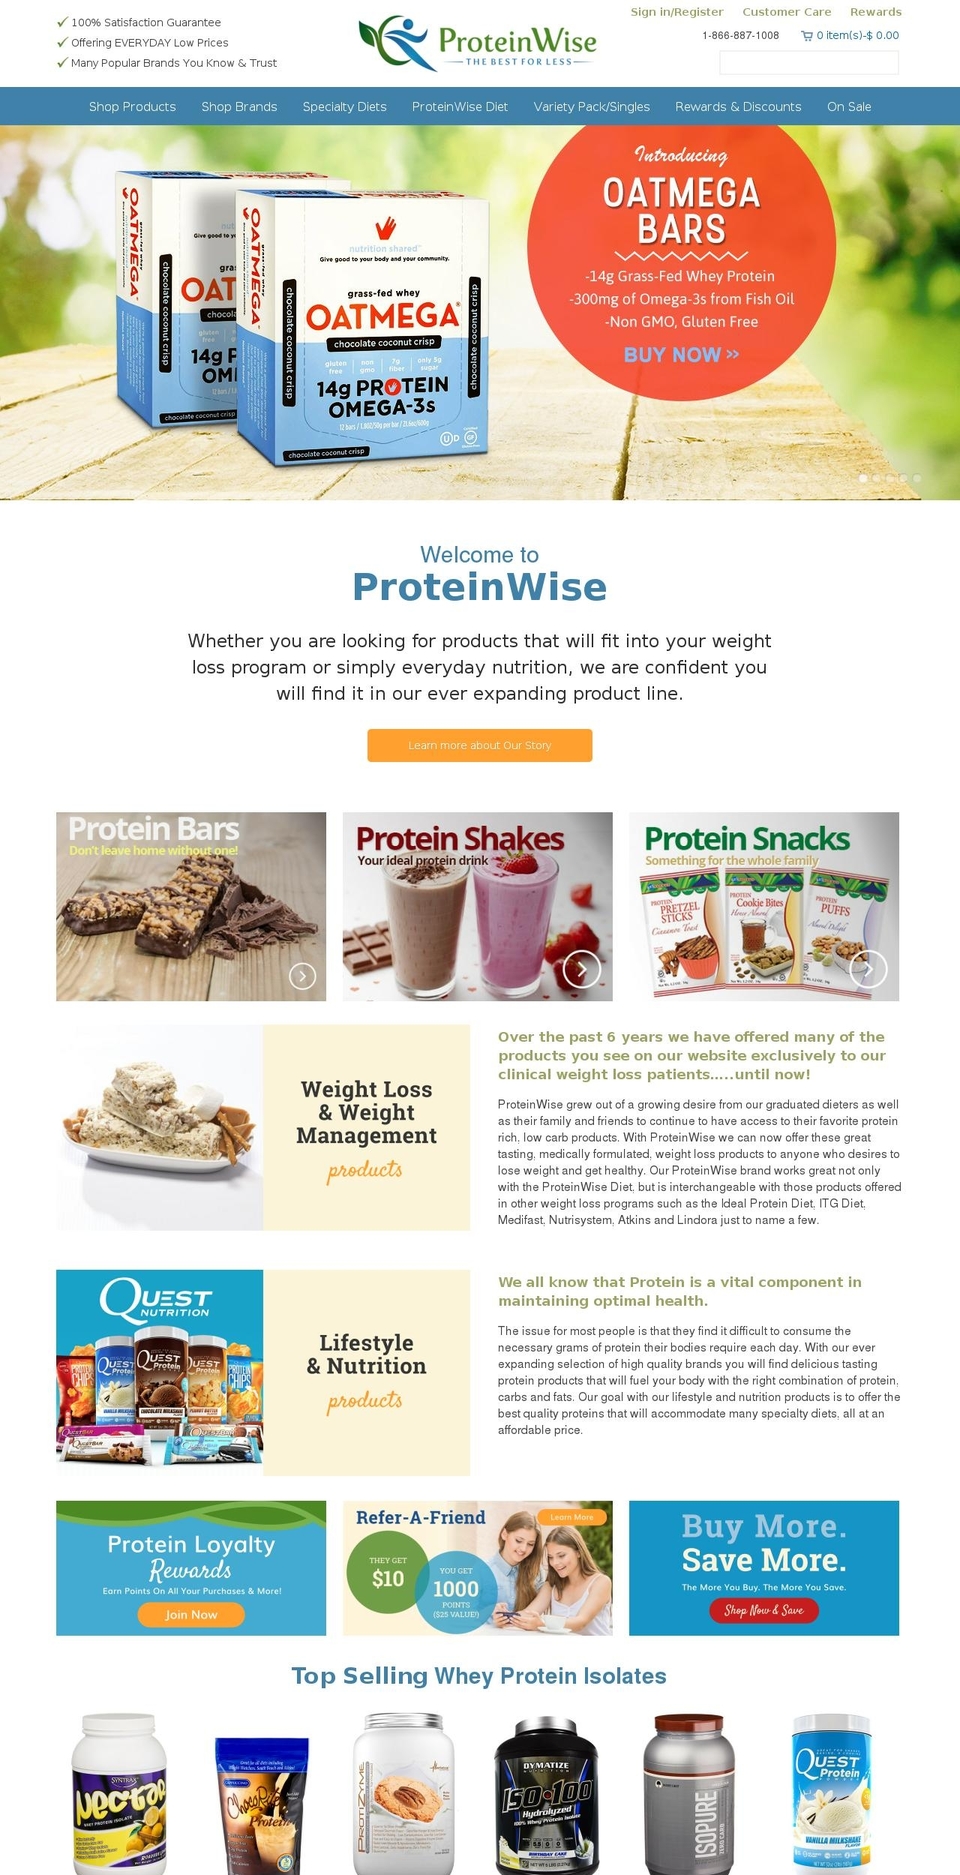 proteinwise.commain Shopify theme site example proteinwise.com